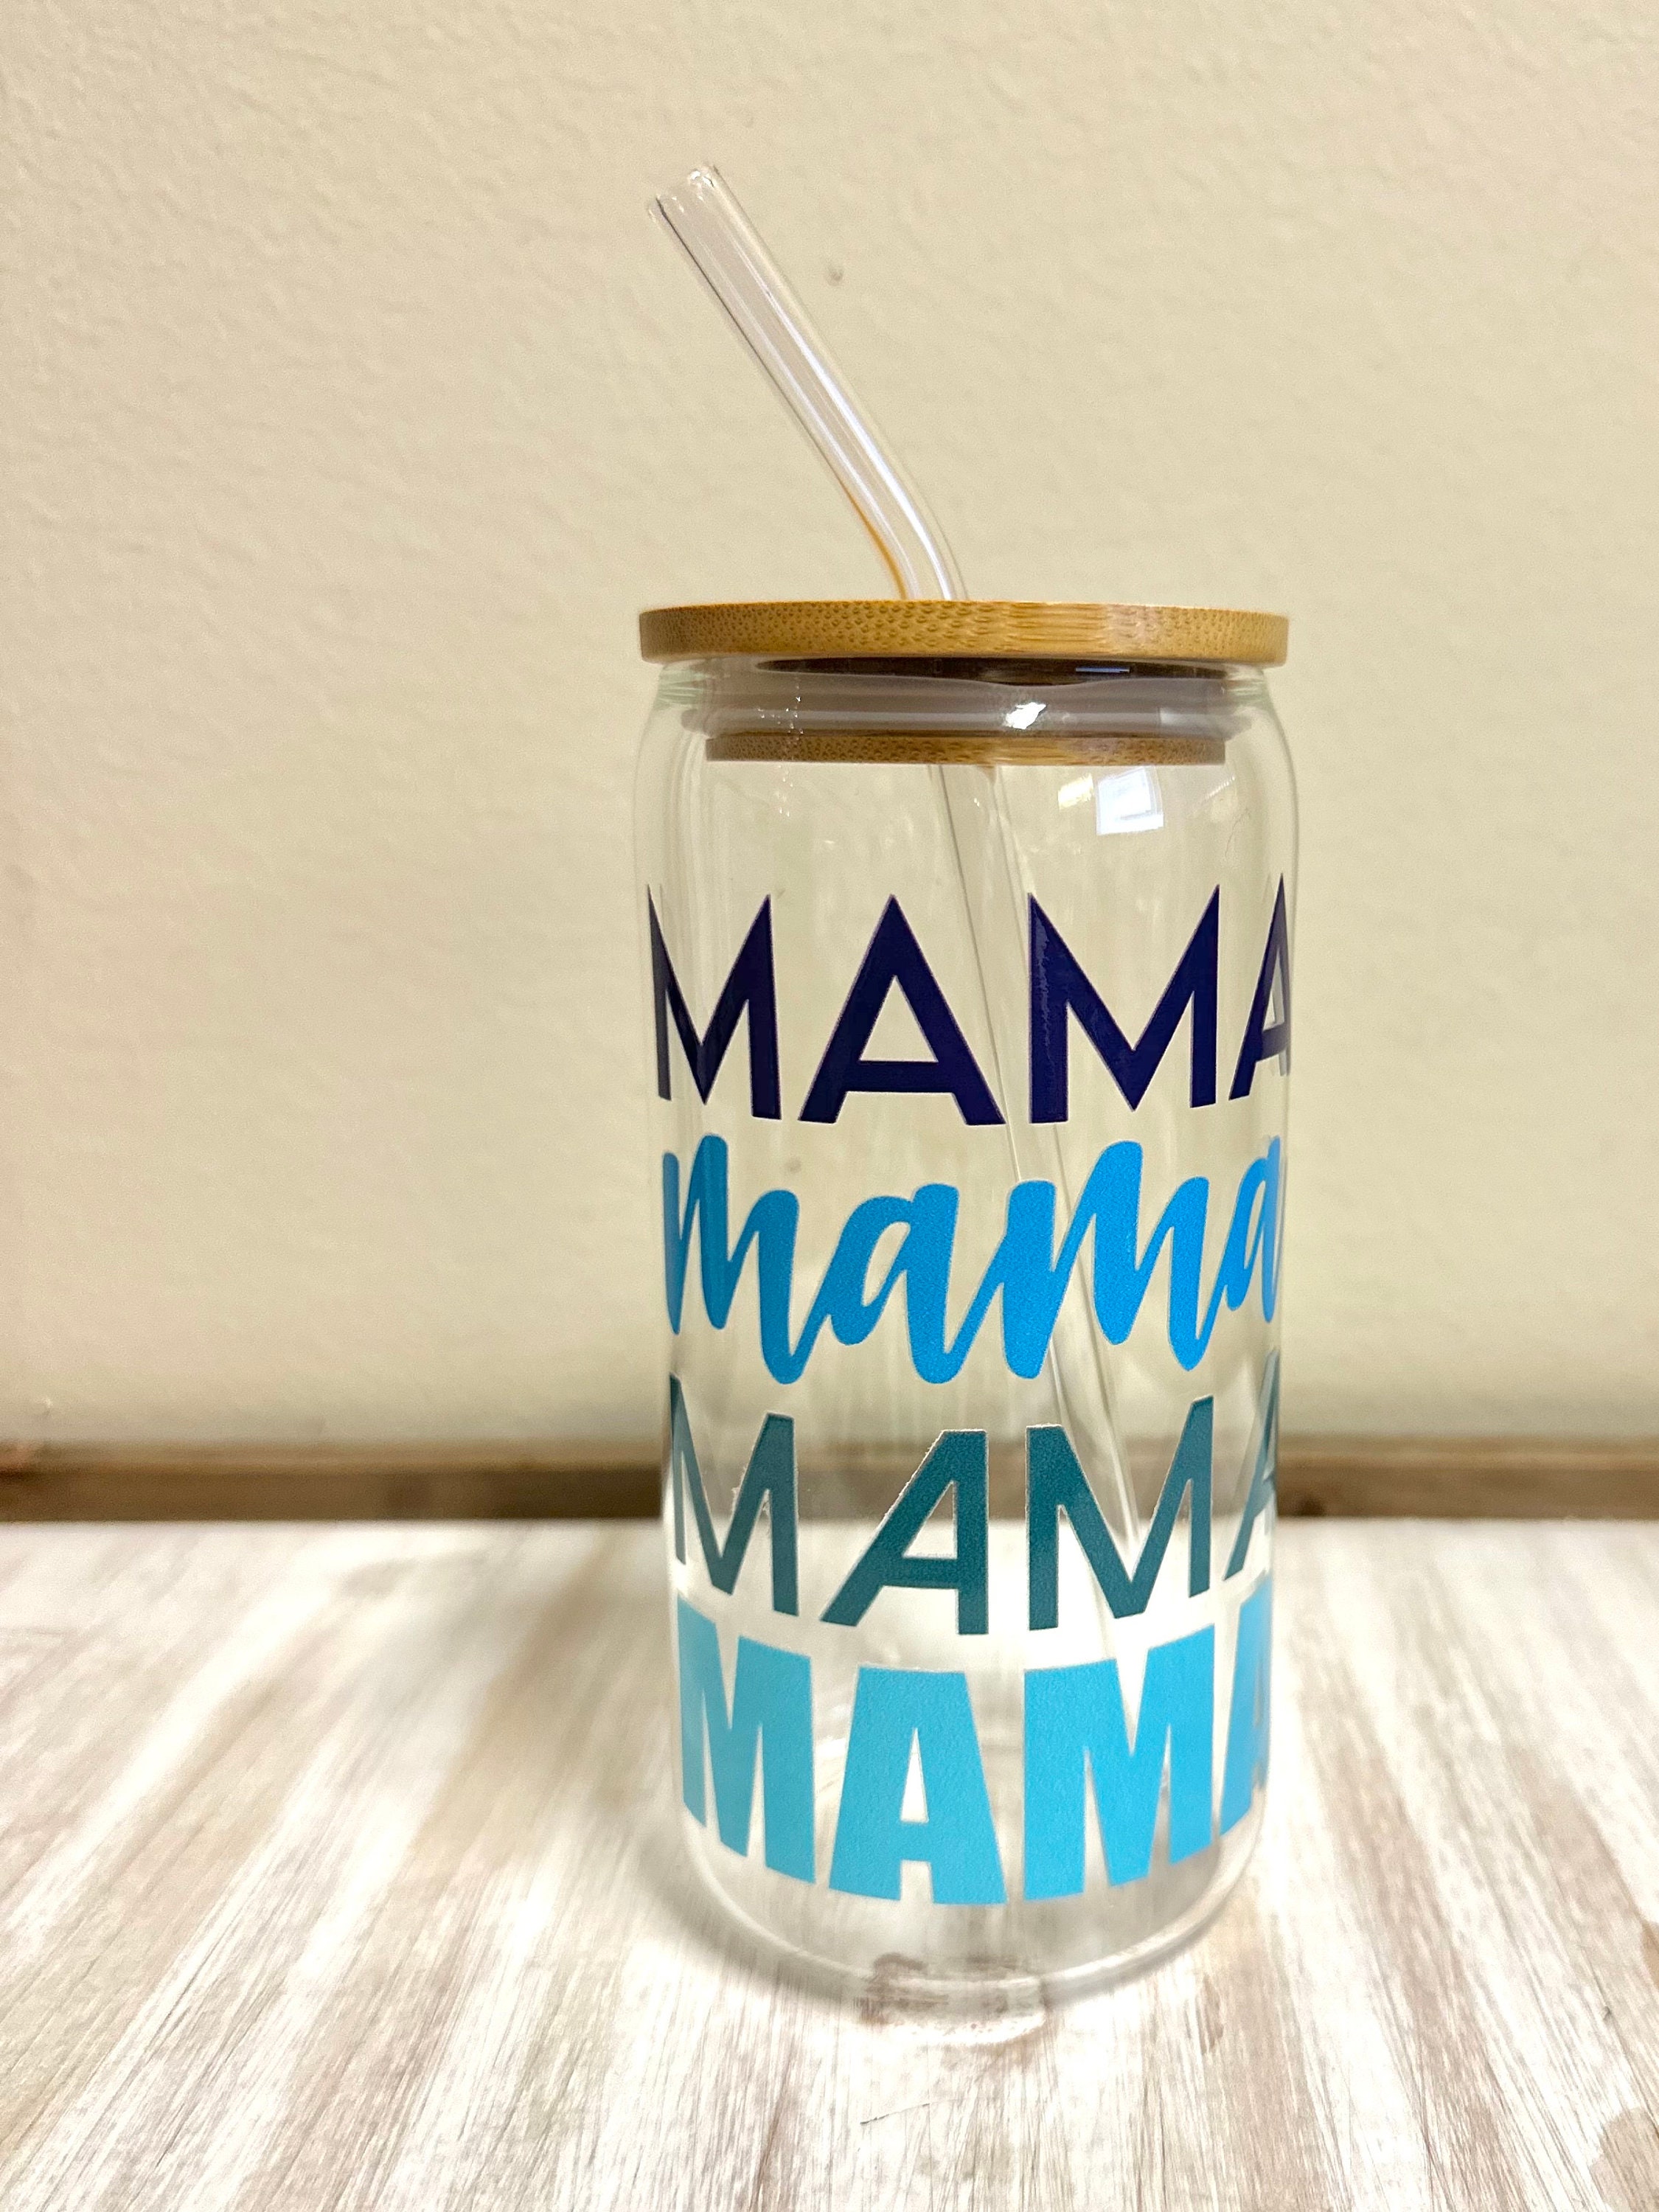 Like Mother Like Children - Personalized Mason Jar Cup With Straw